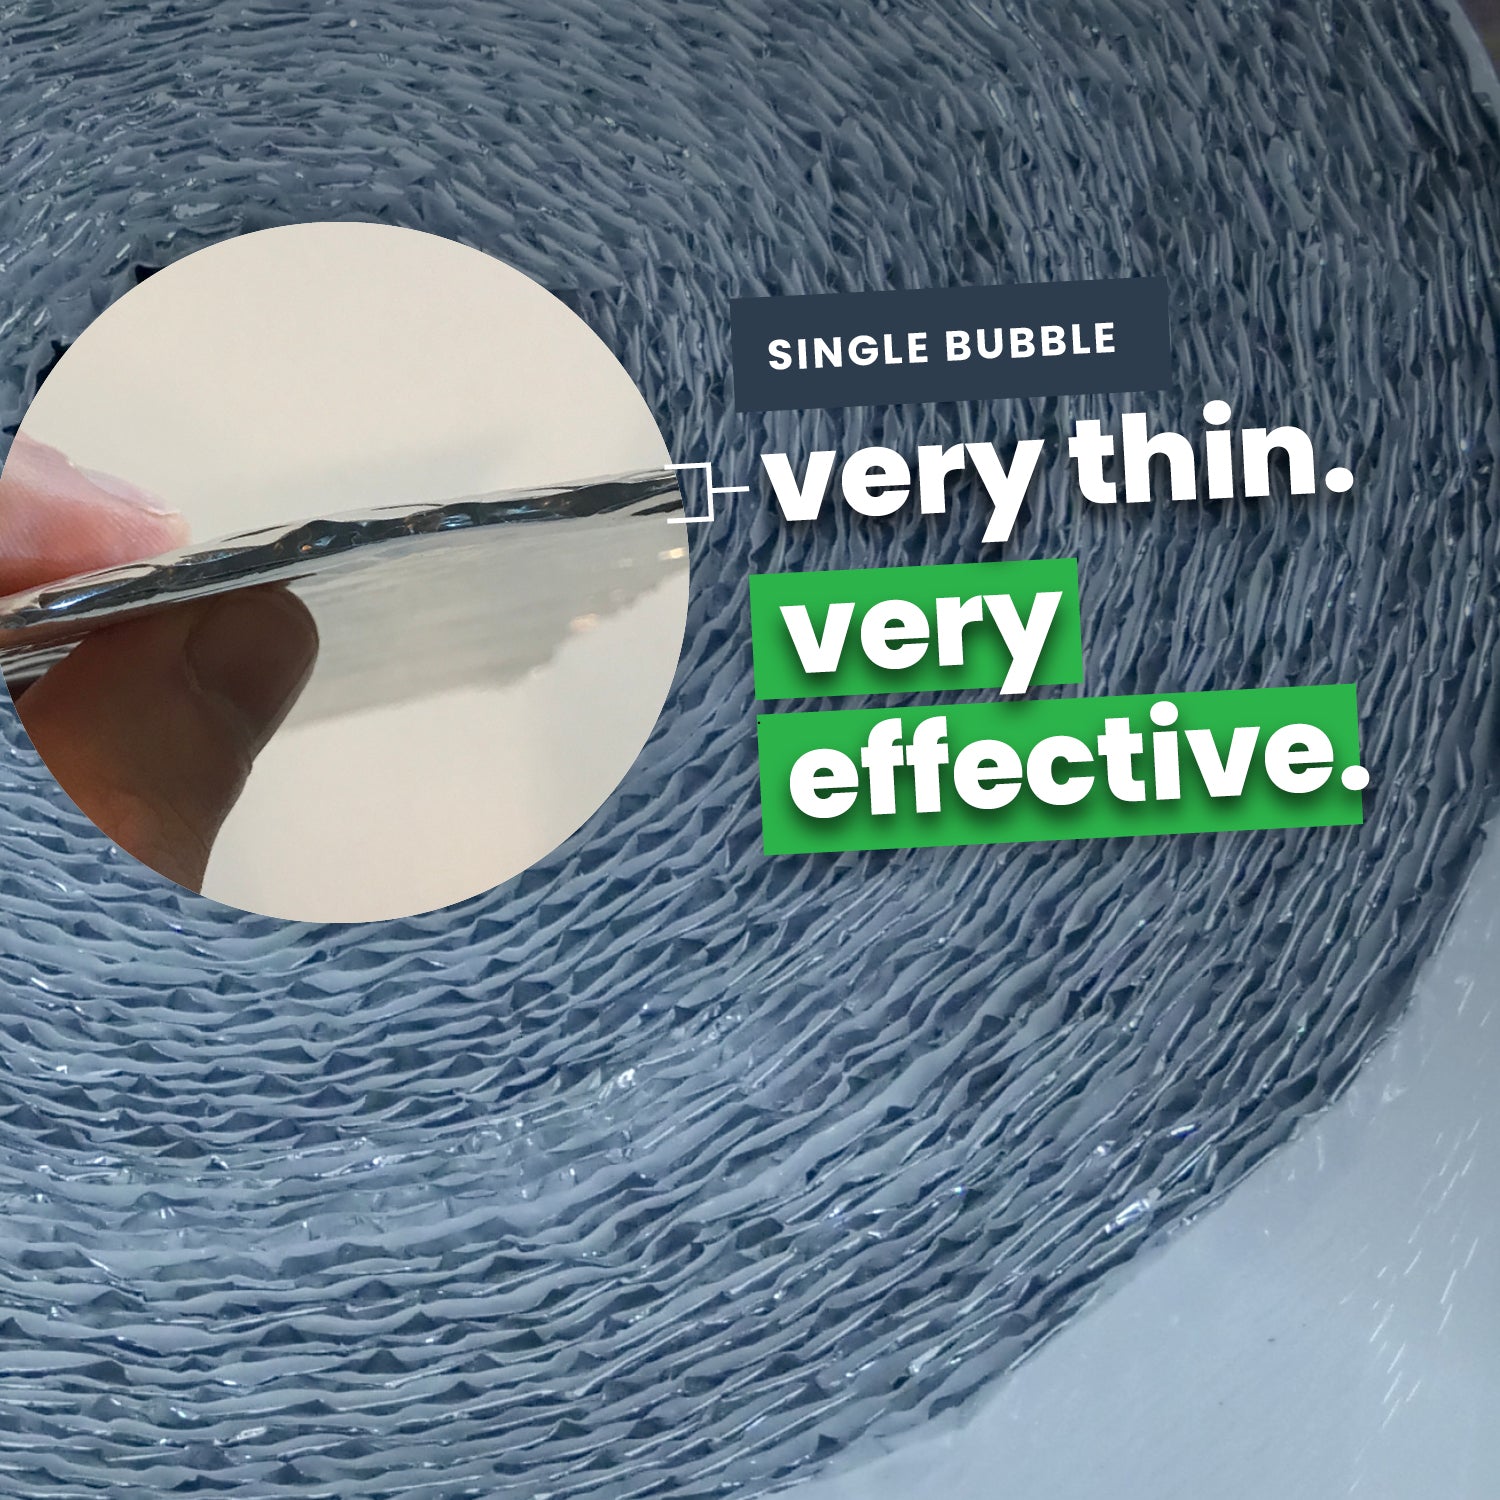 single bubble is very thin and effective